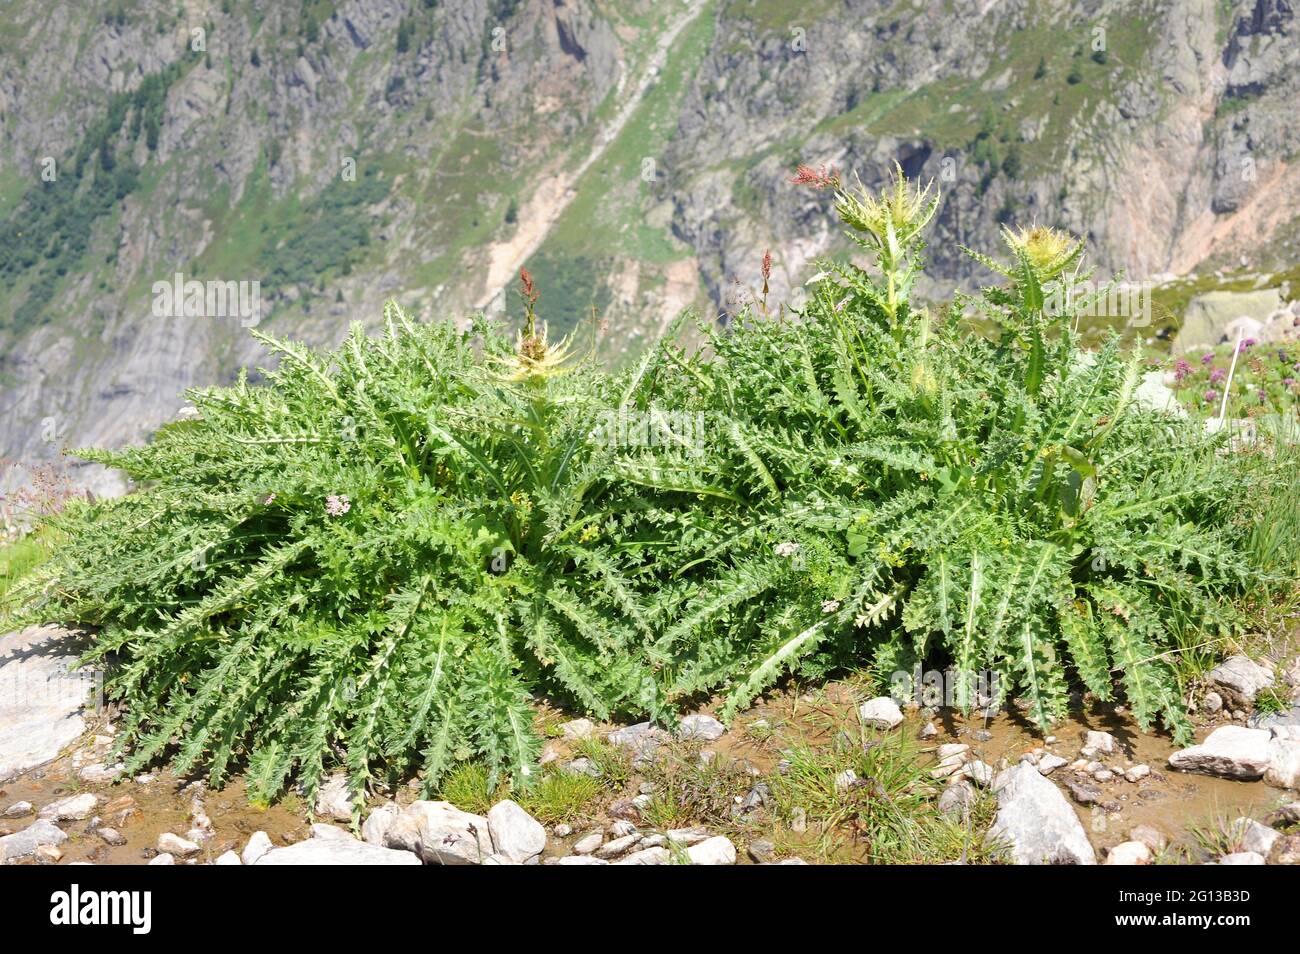 Spiniest thistle (Cirsium spinosissimum) is a spiny perennial plant native to Alps and Balkans. This photo was taken in french Alps, near Chamonix. Stock Photo